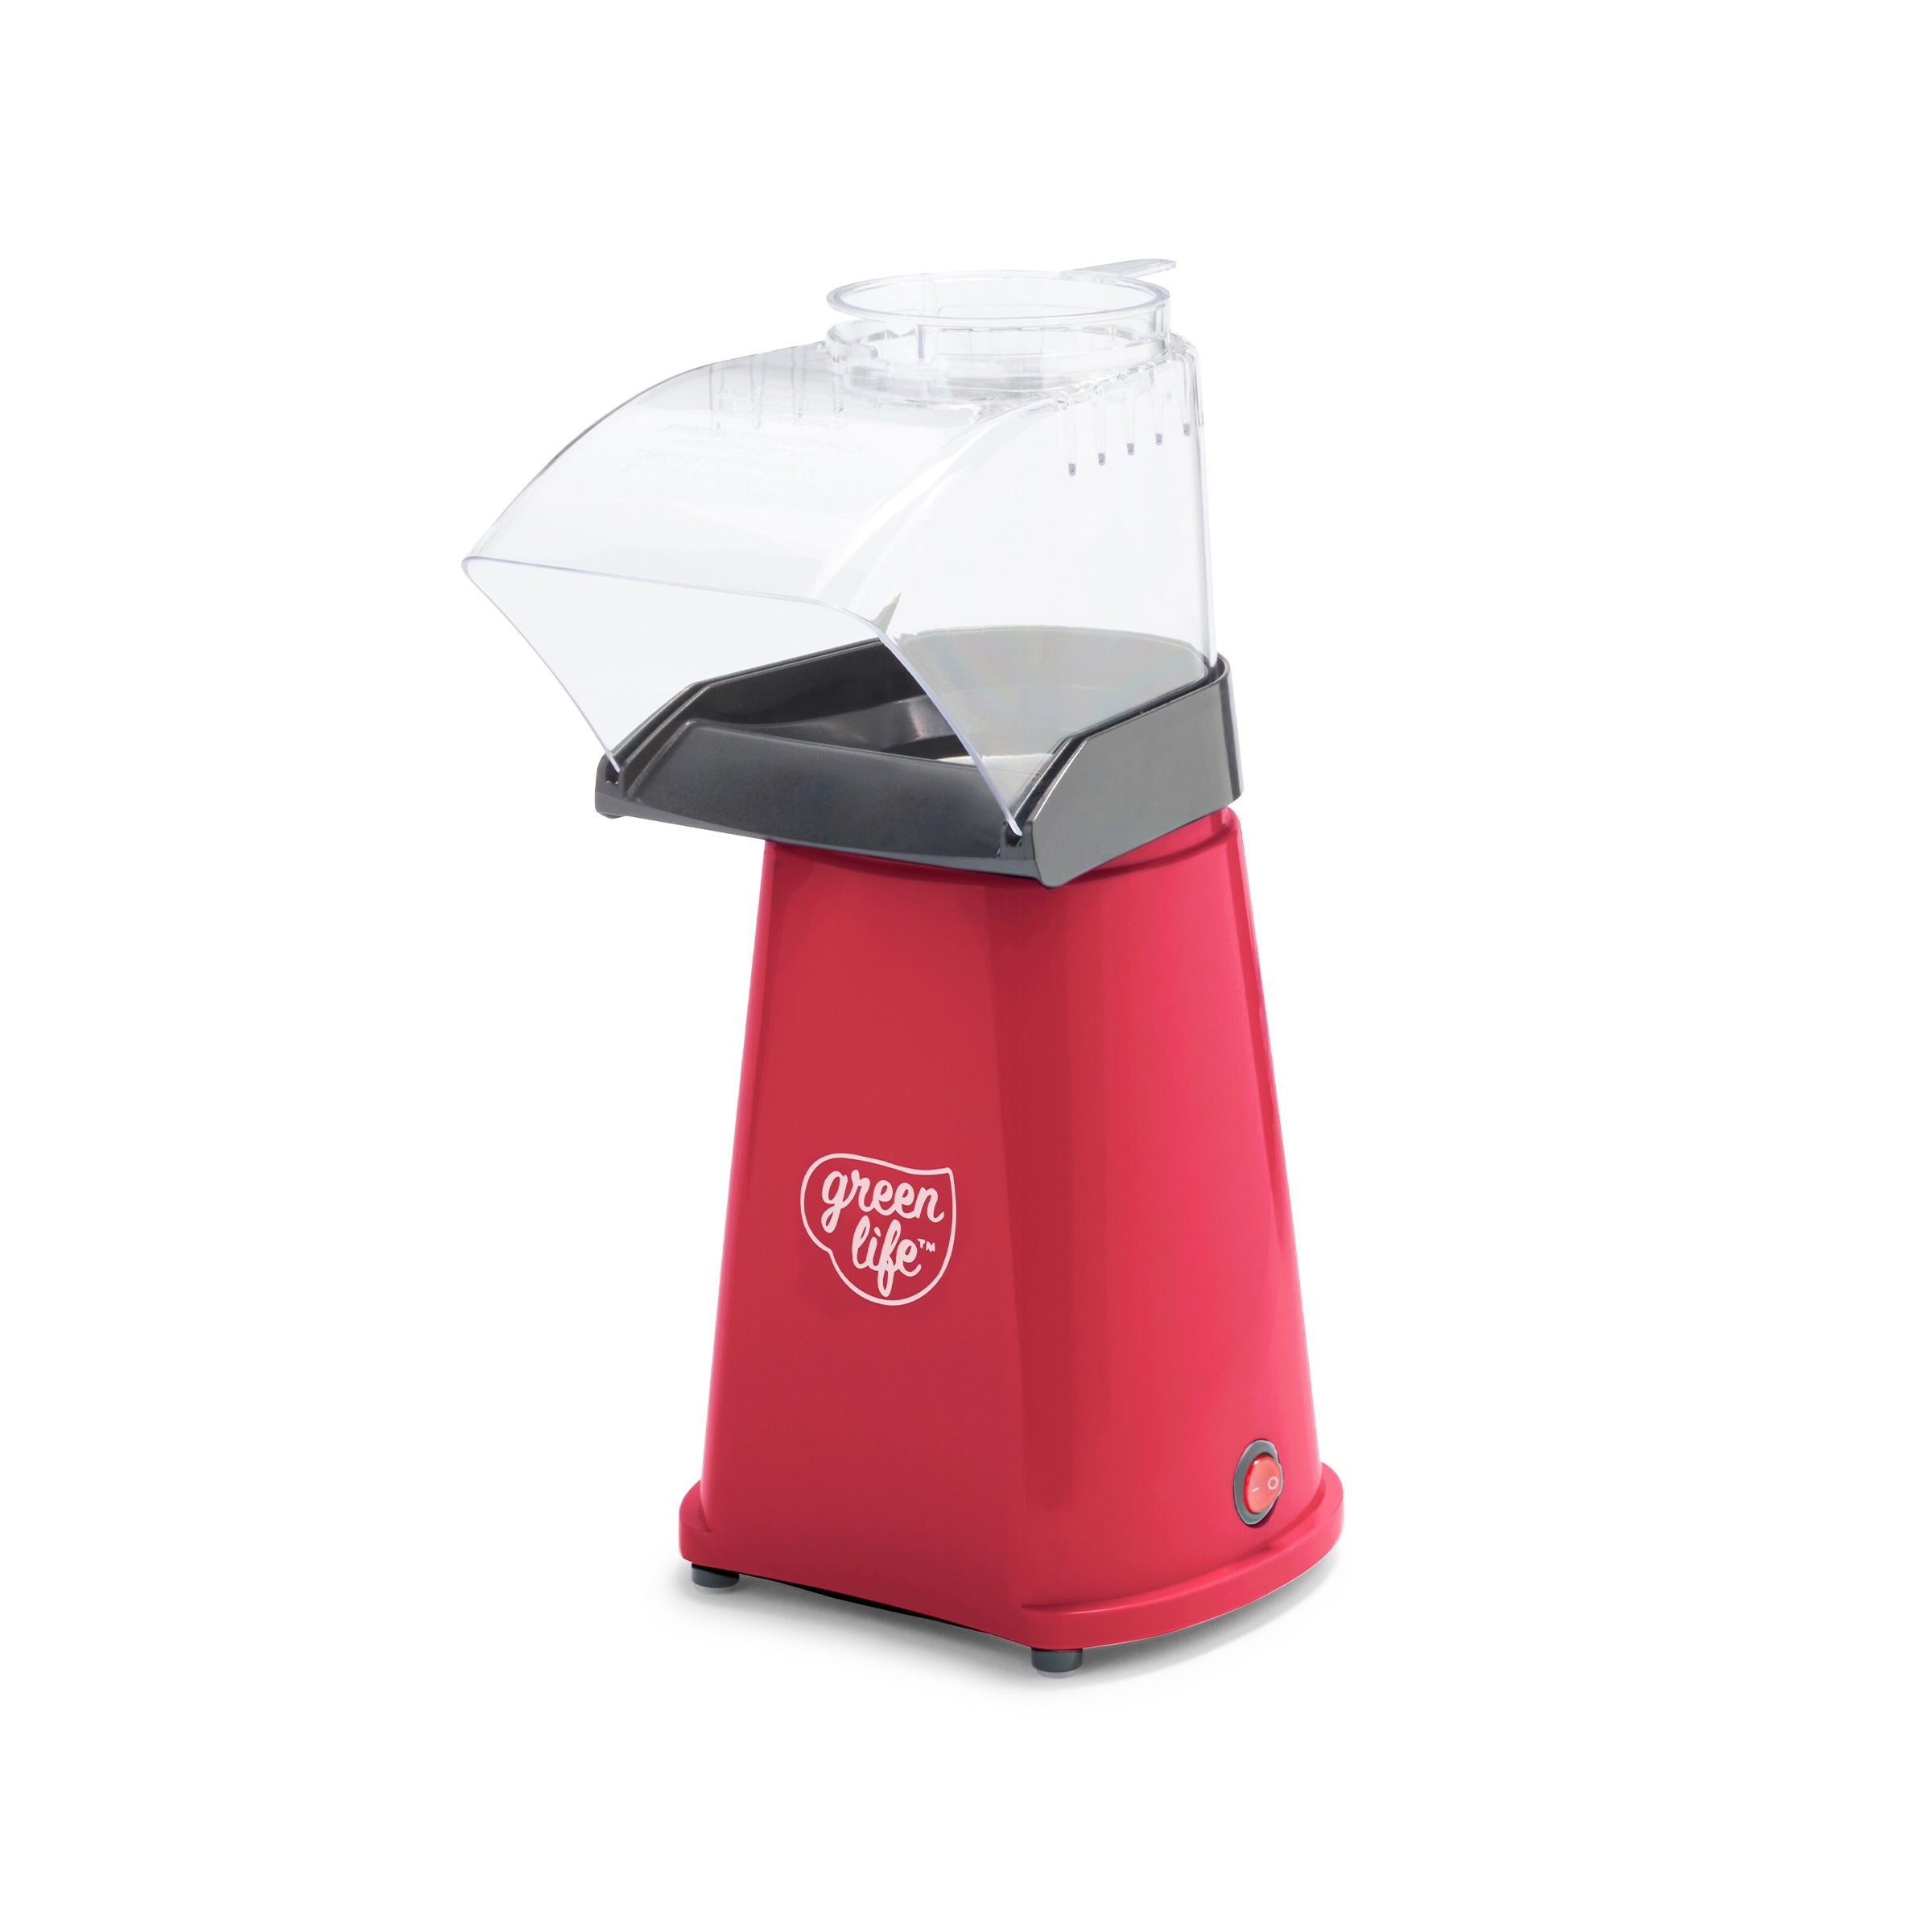 "Now Showing" Popcorn Popper Red